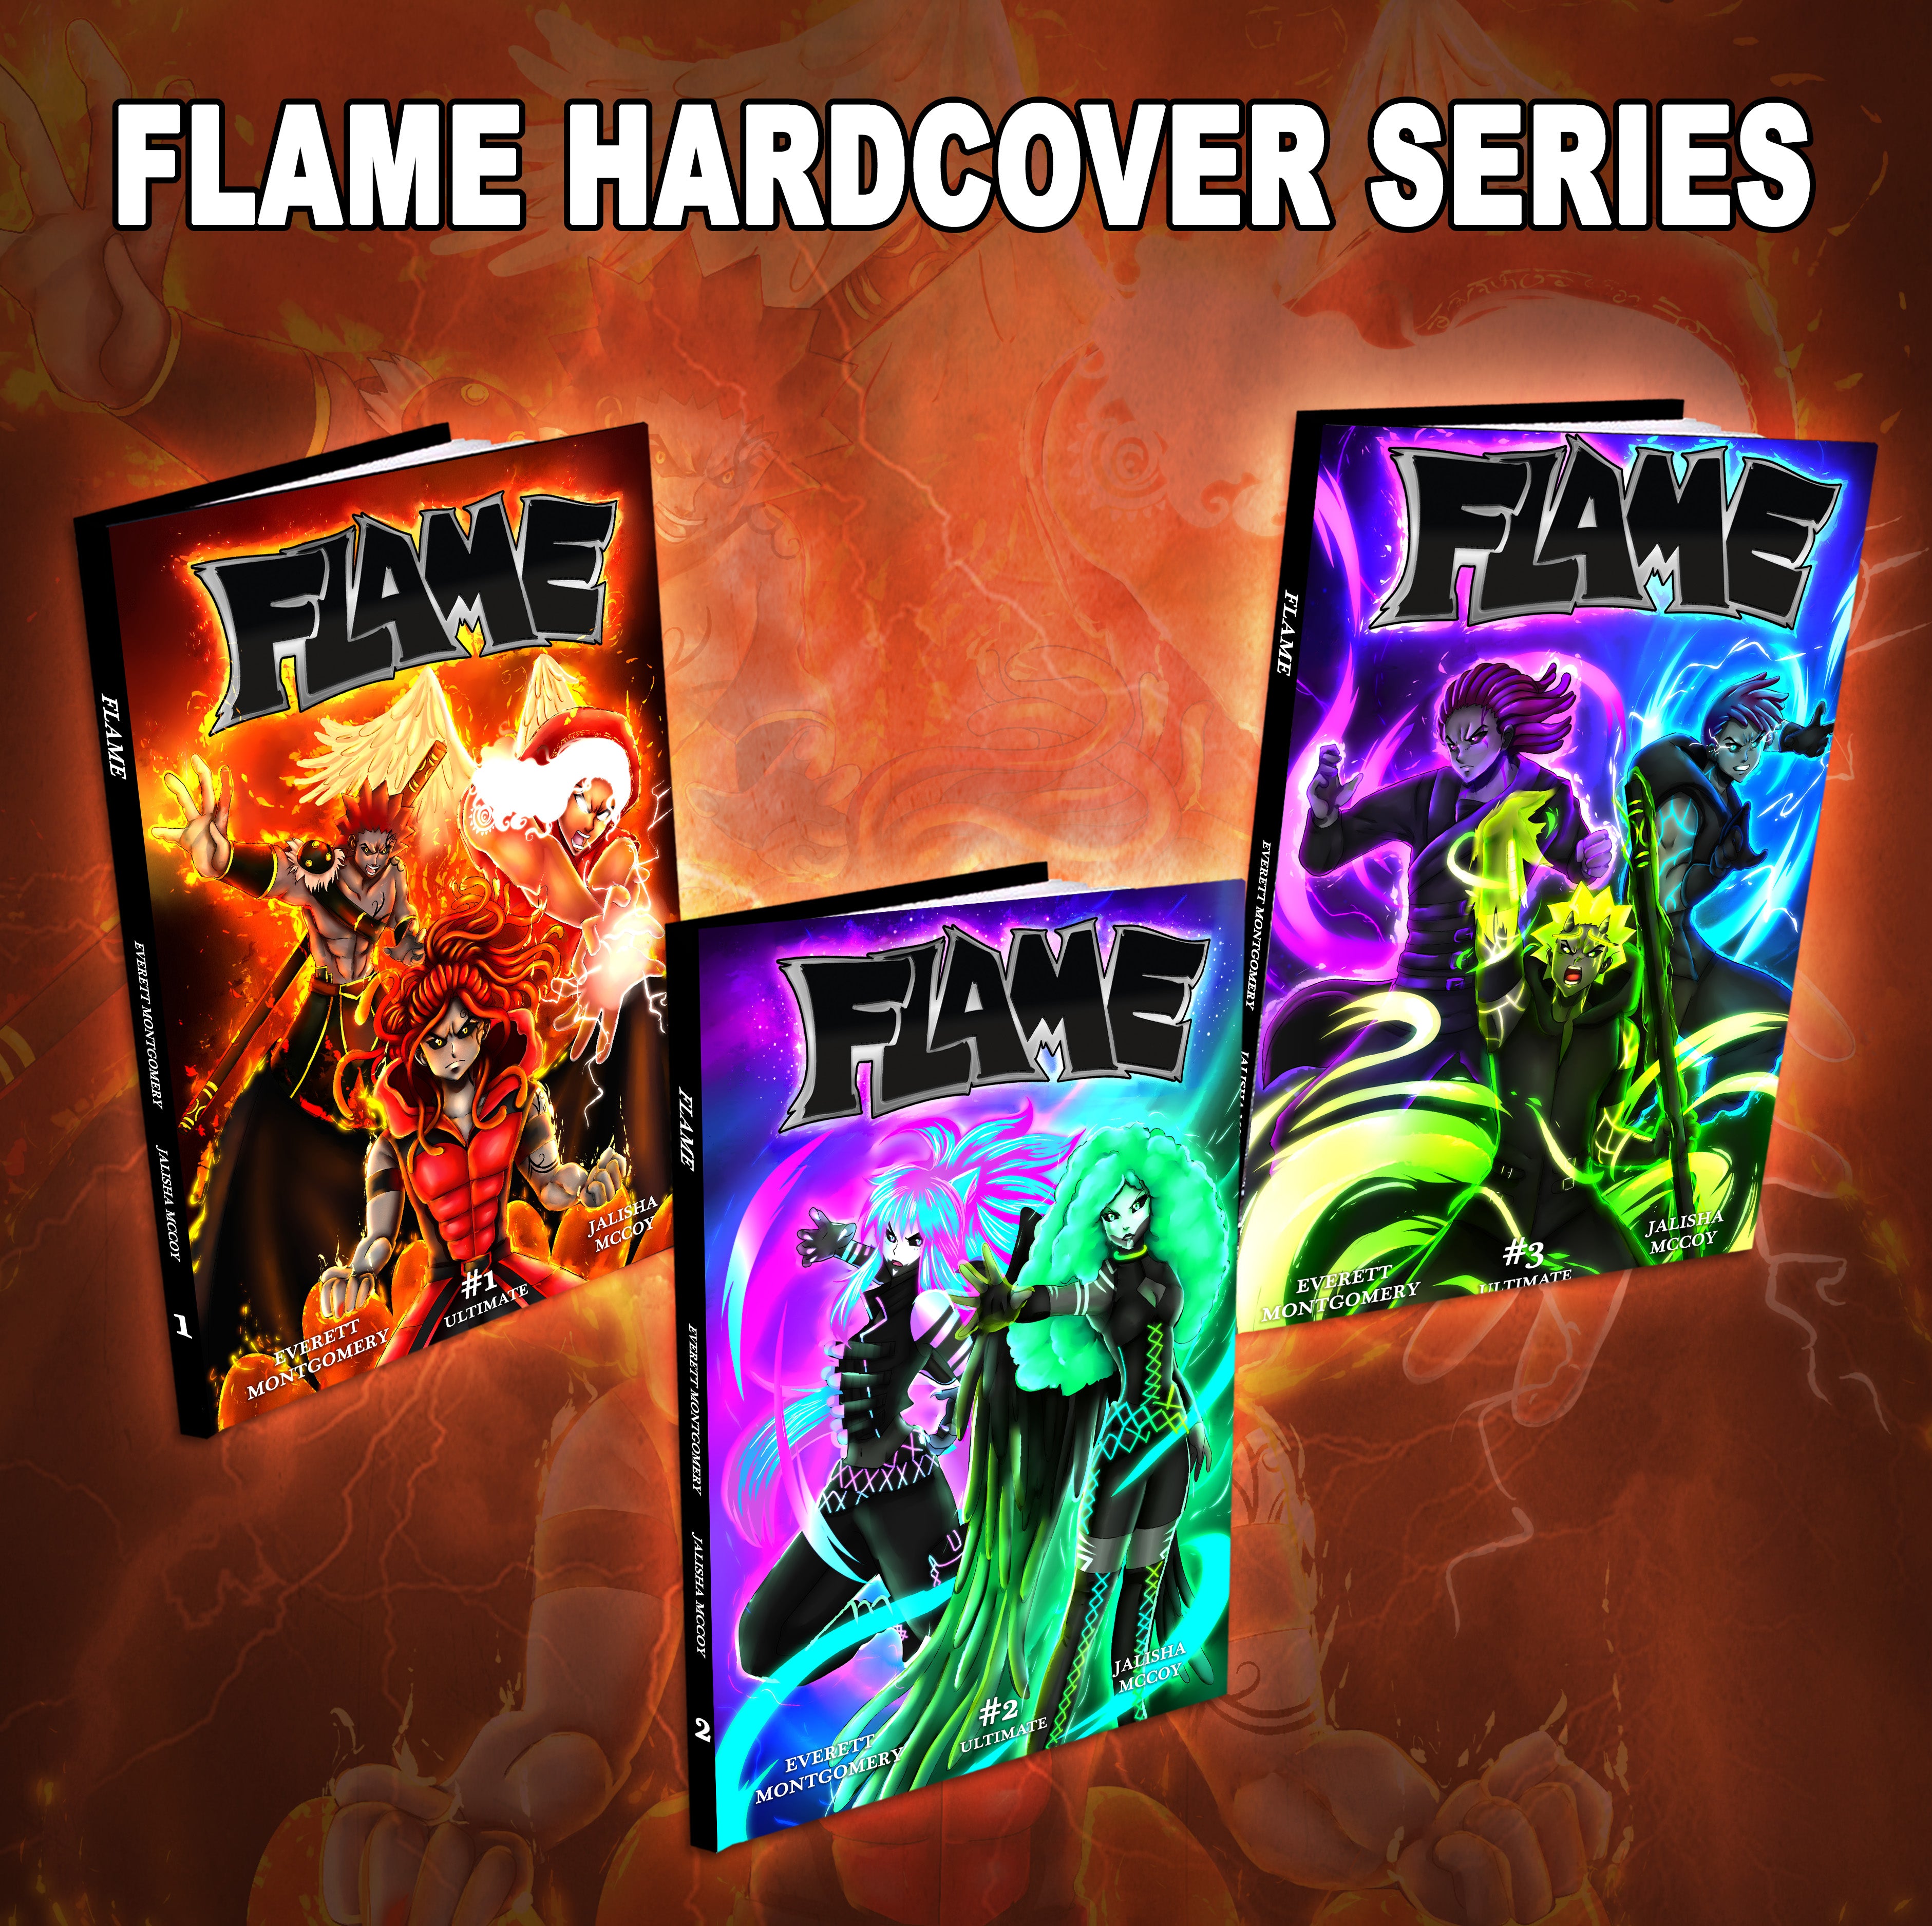 Flame Hardcover Series